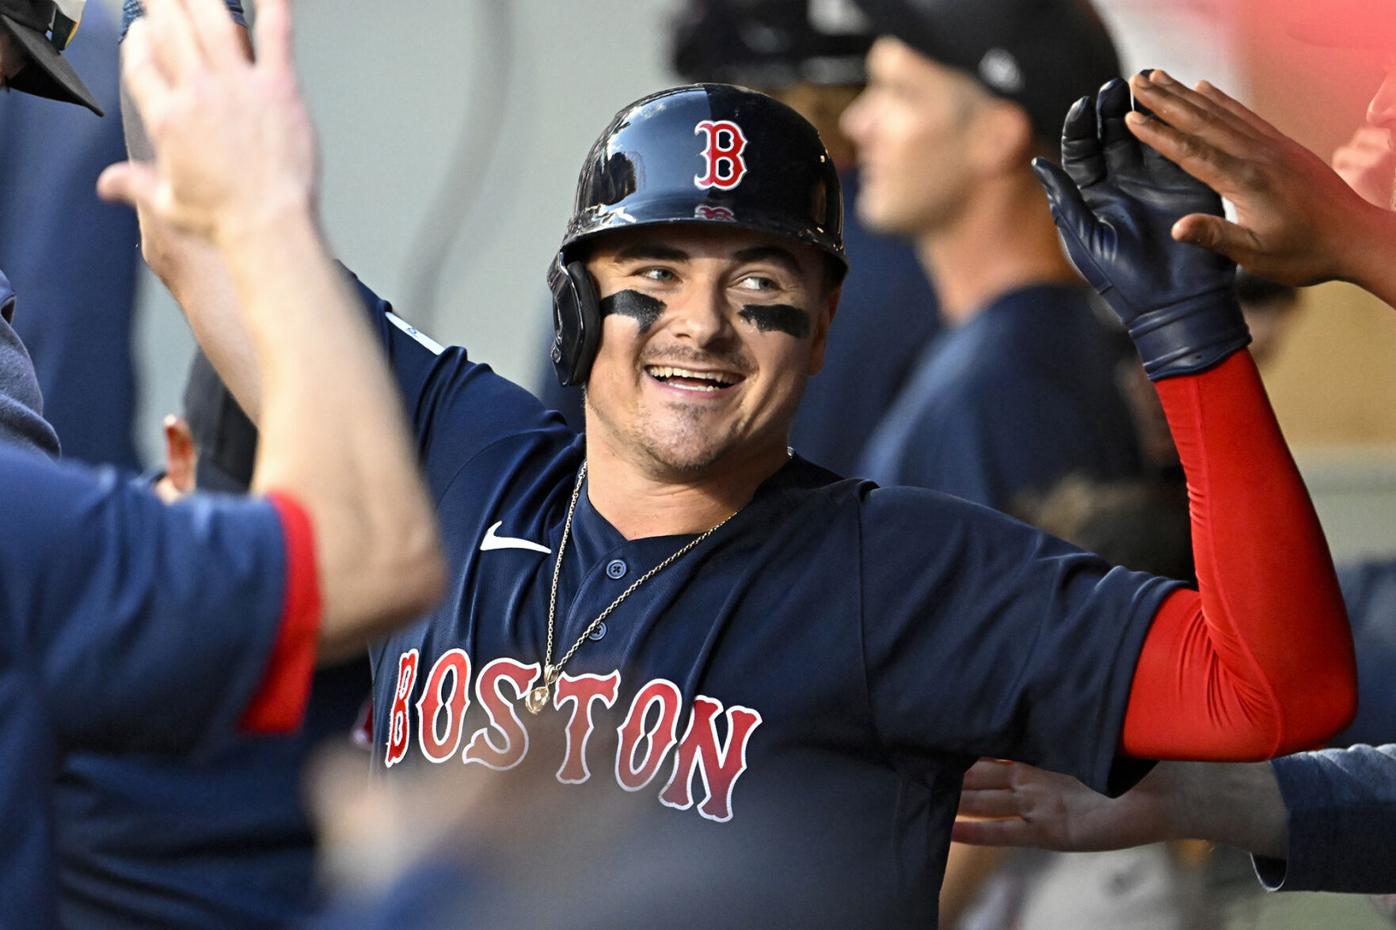 Alex Verdugo, Reese McGuire Homer as Red Sox Top Mariners 6-4 to